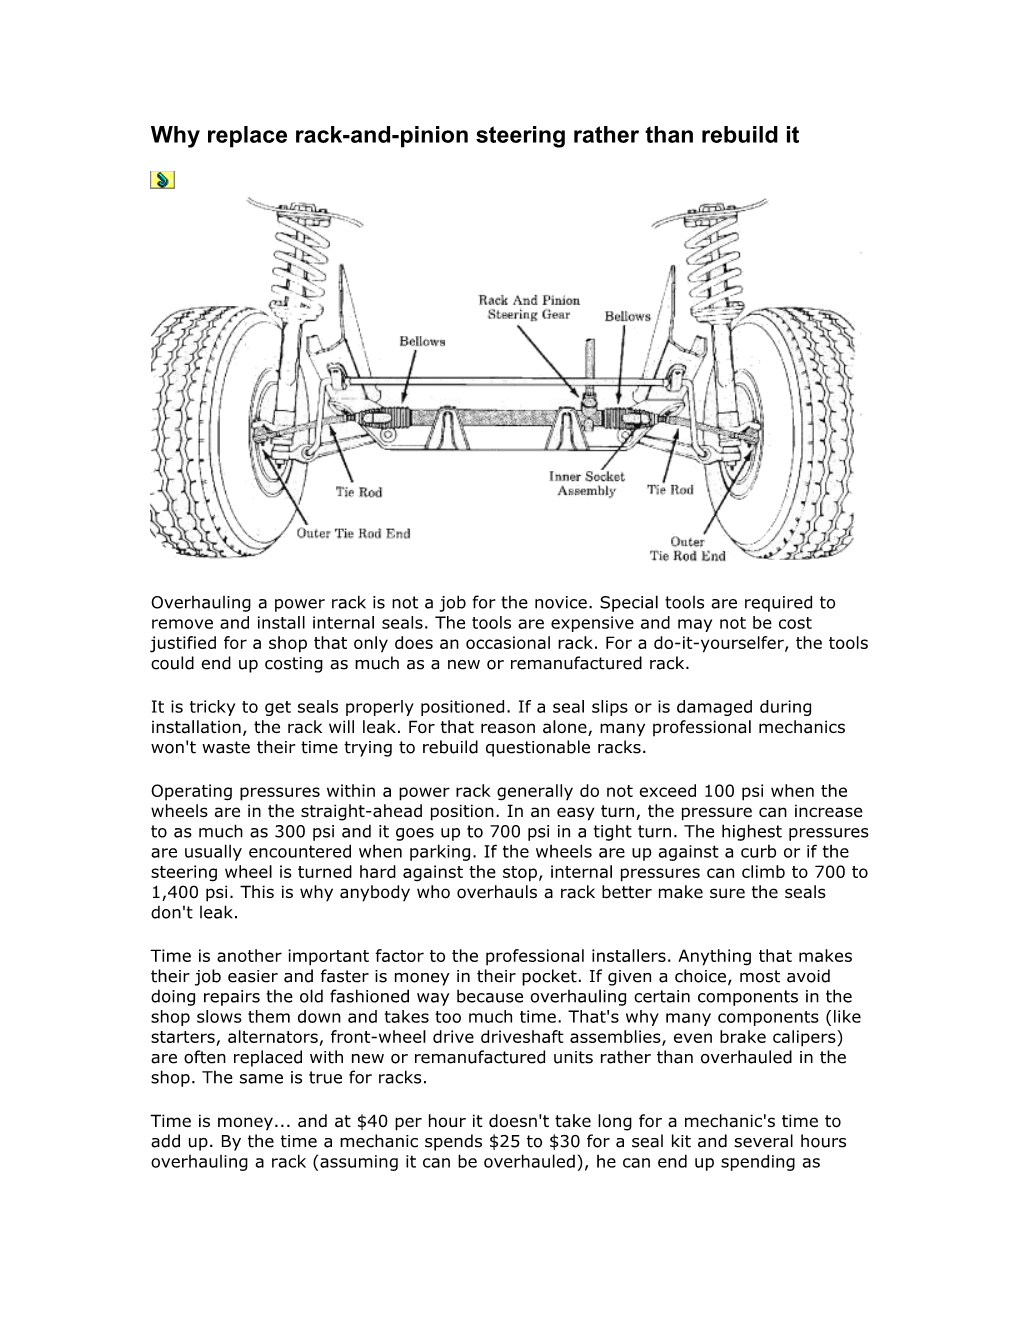 Why Replace Rack-And-Pinion Steering Rather Than Rebuild It